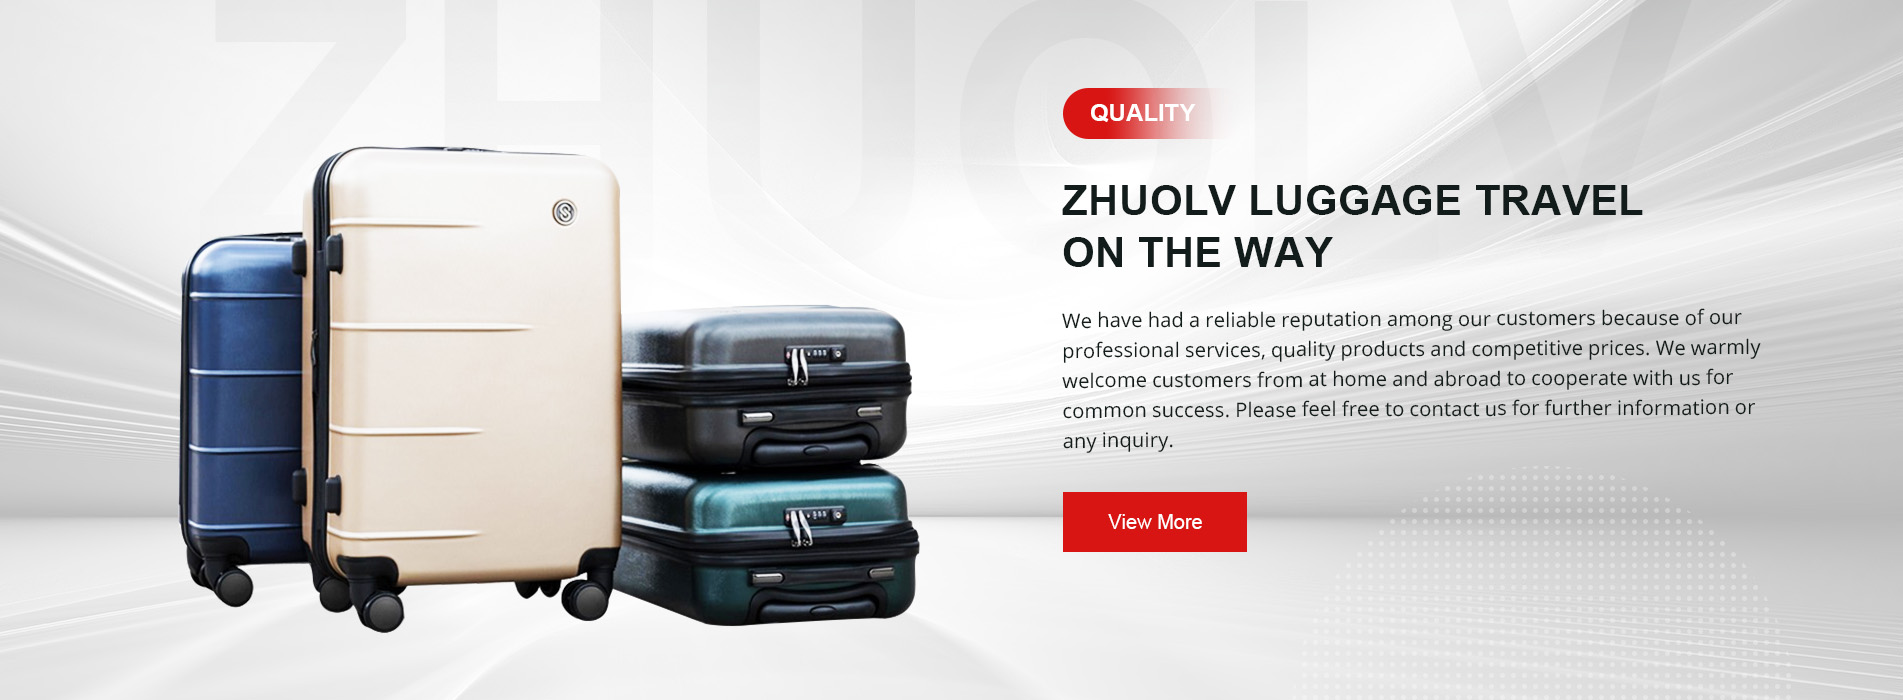 Luggage, Durable Suitcase manufacturer